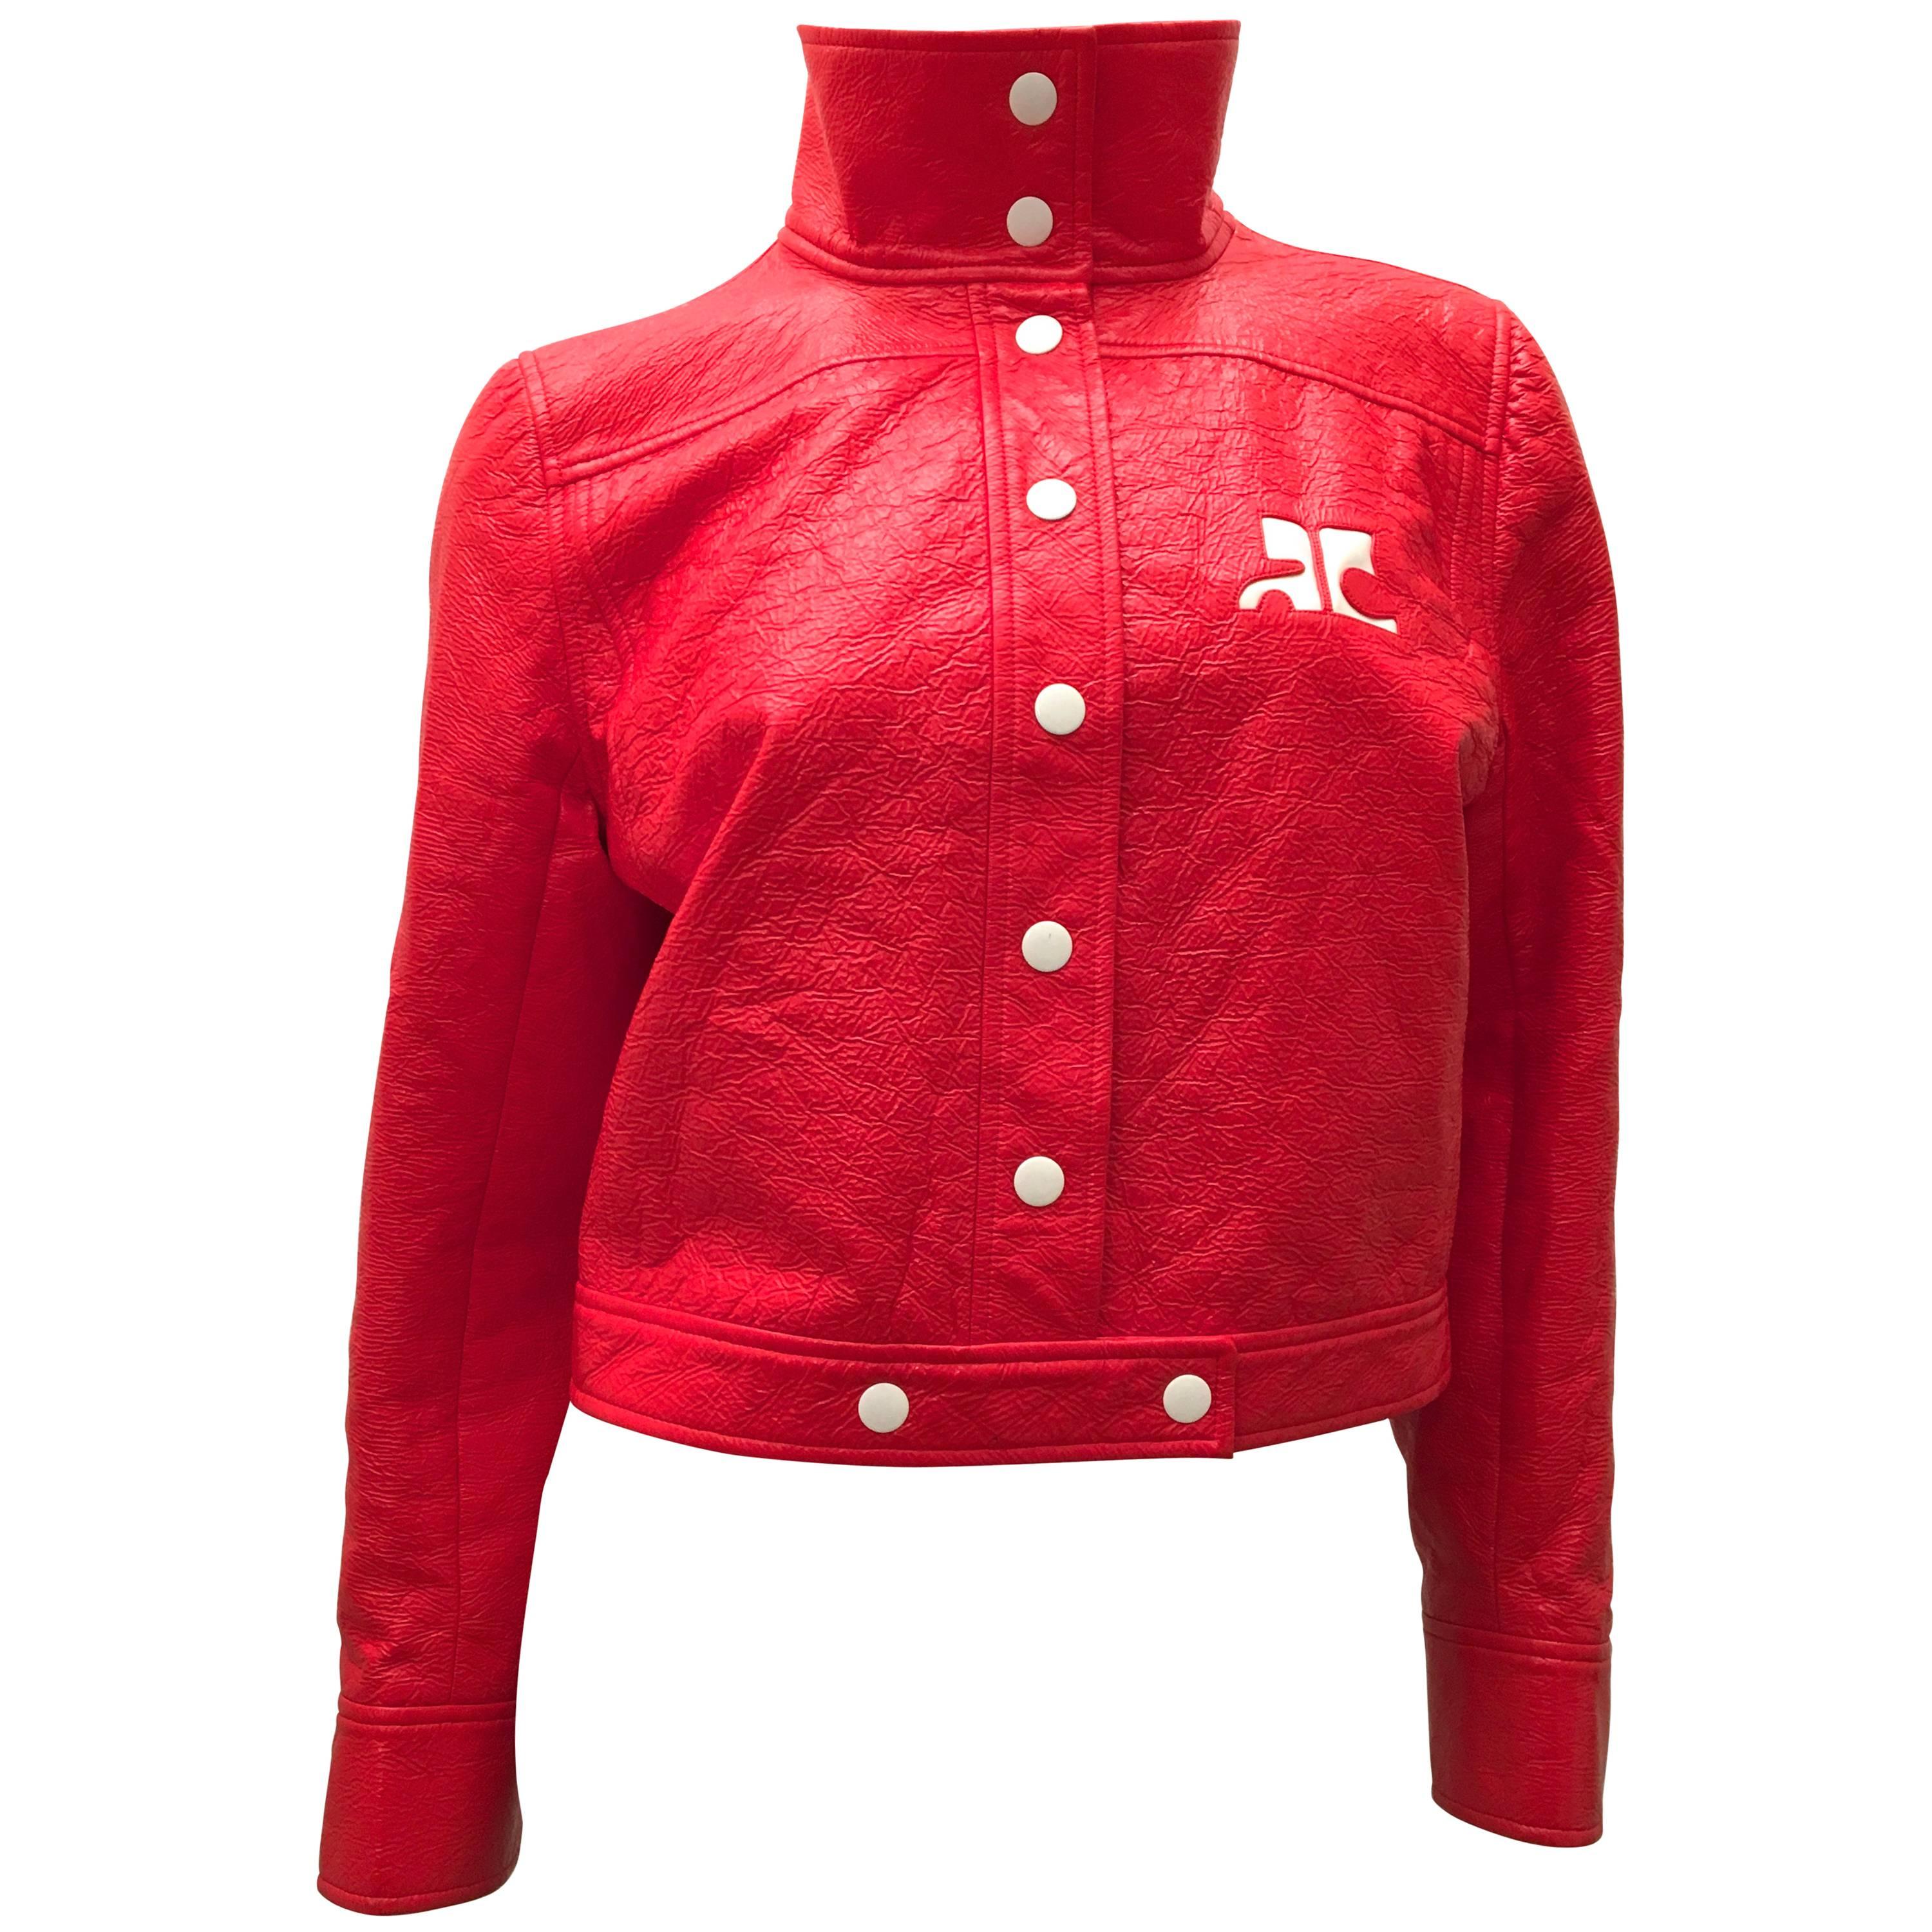 New Courreges Jacket - Orange / Red Patent Leather  For Sale